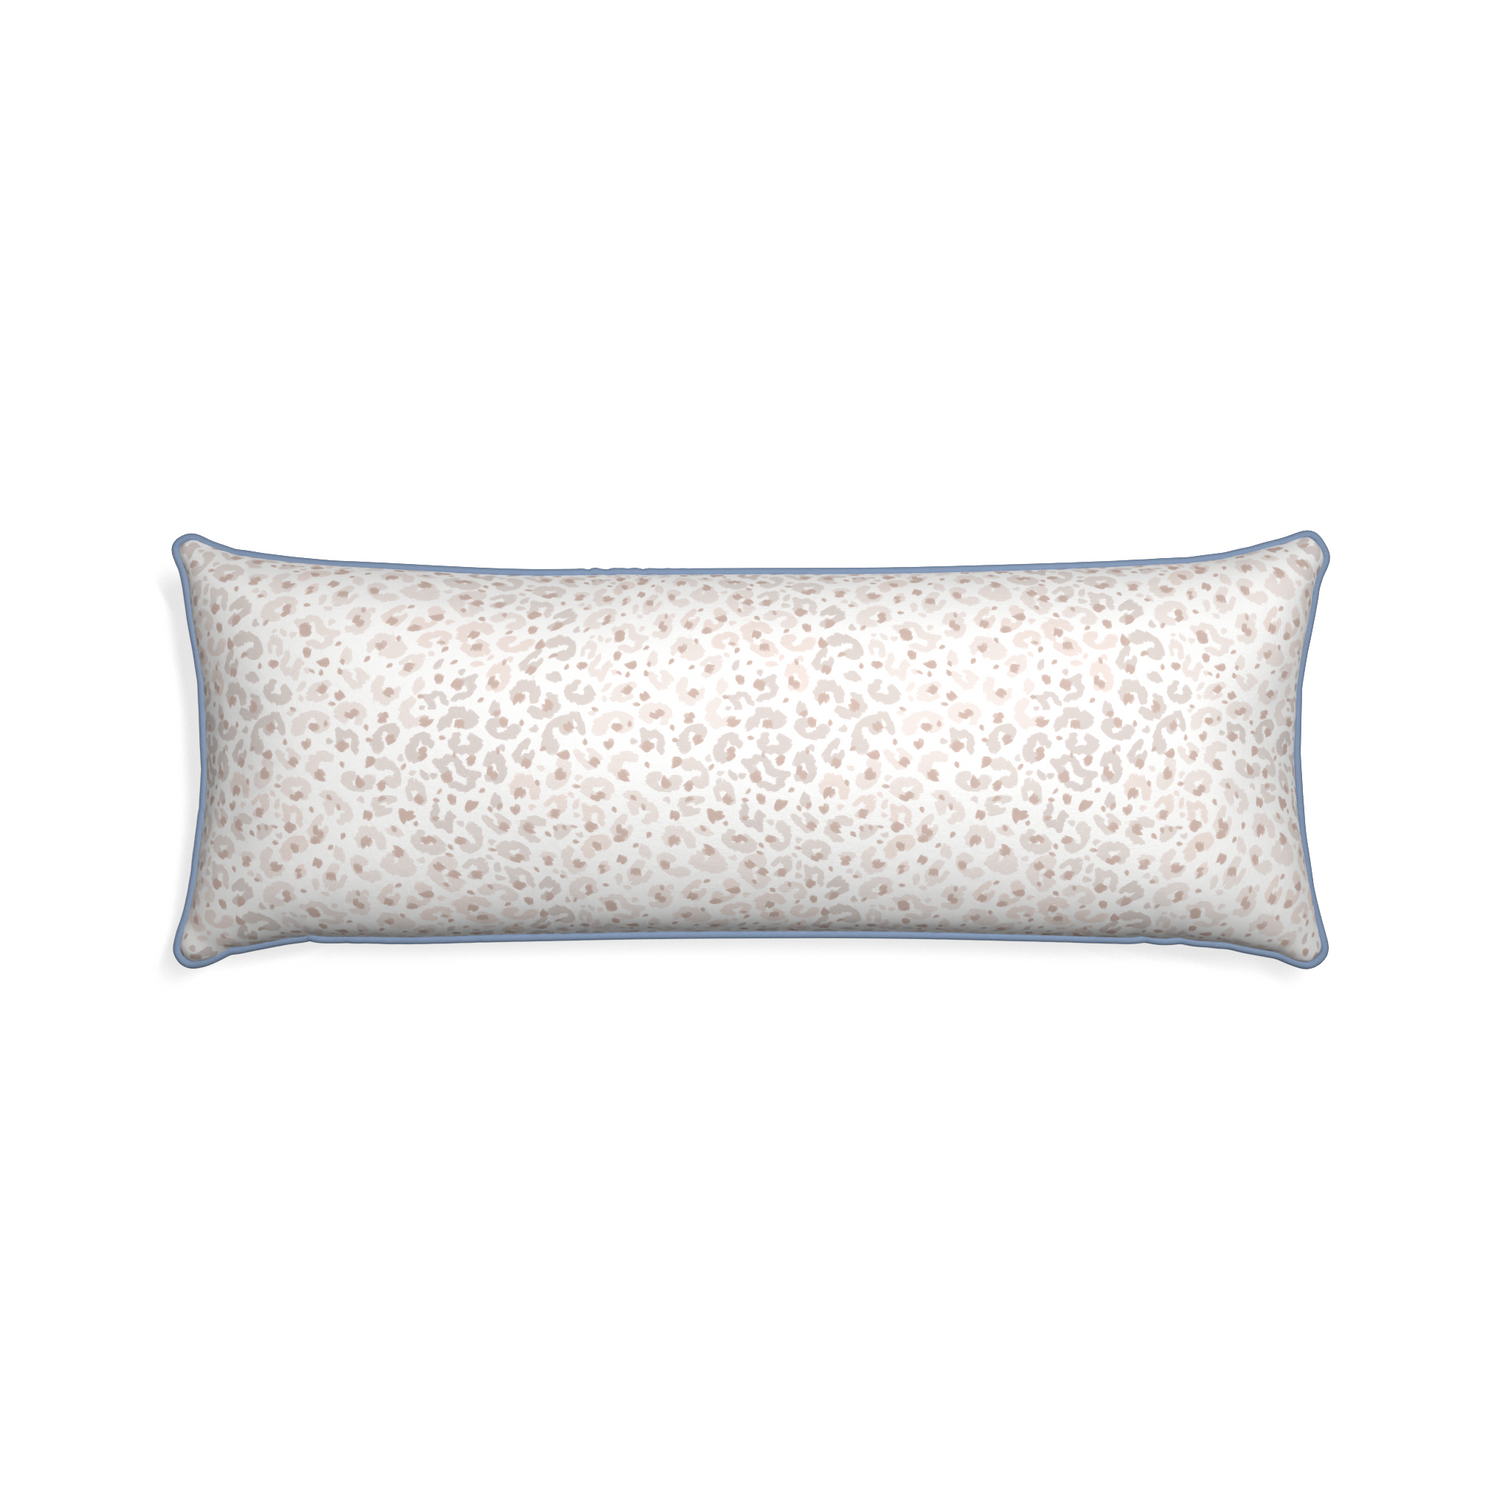 Xl-lumbar rosie custom pillow with sky piping on white background